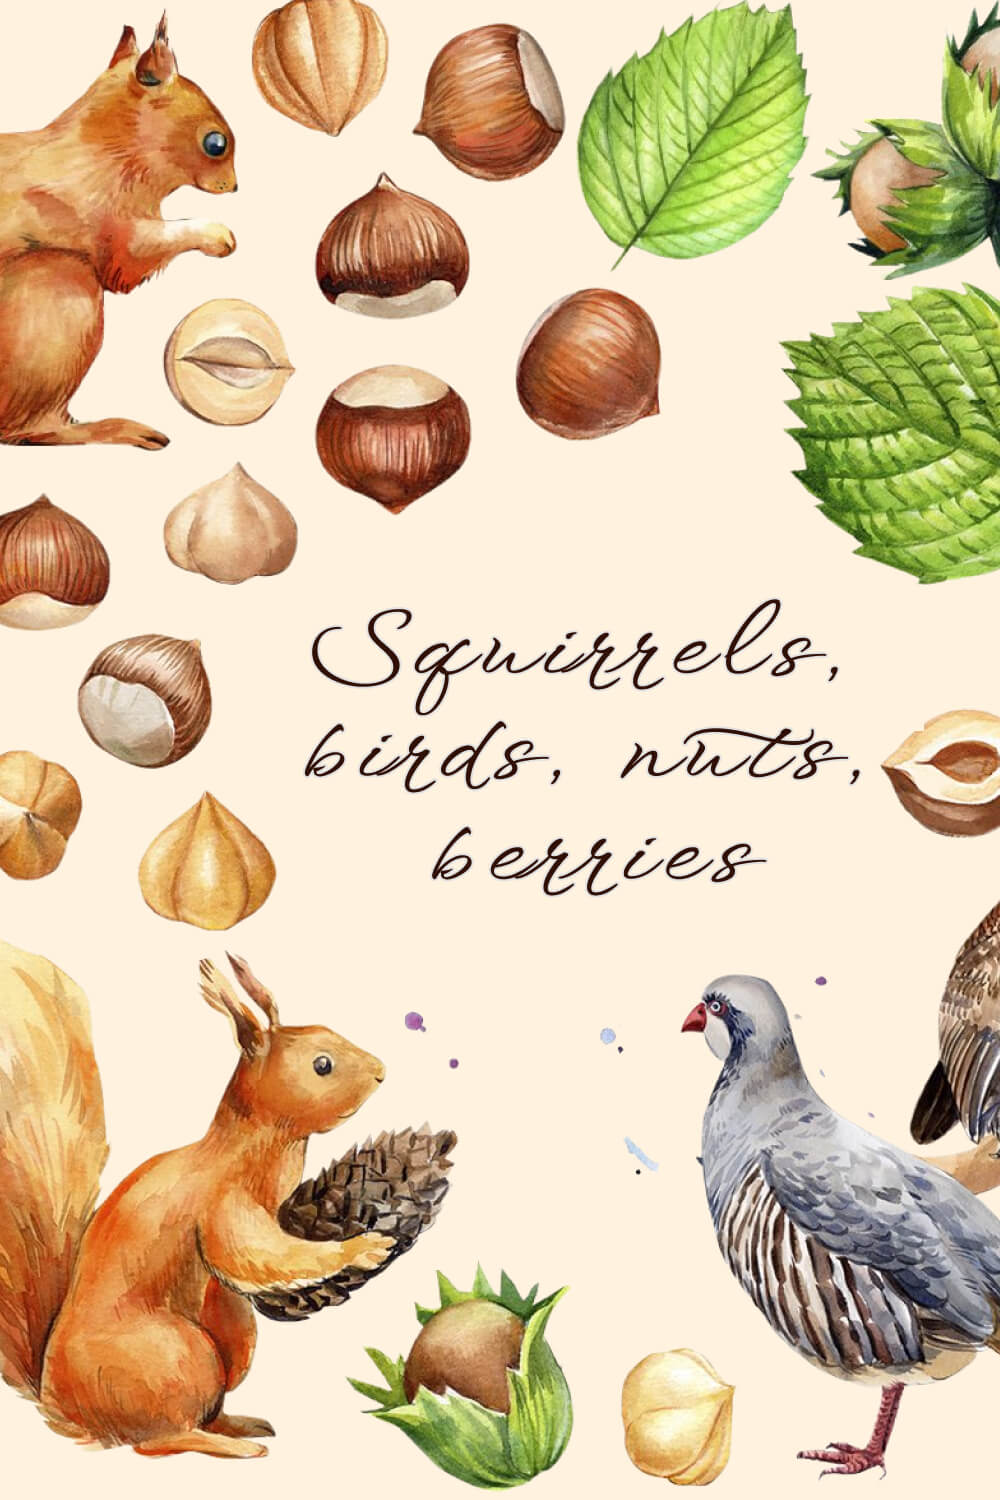 Red Squirrels and gray birds with nuts and cones on a beige background.